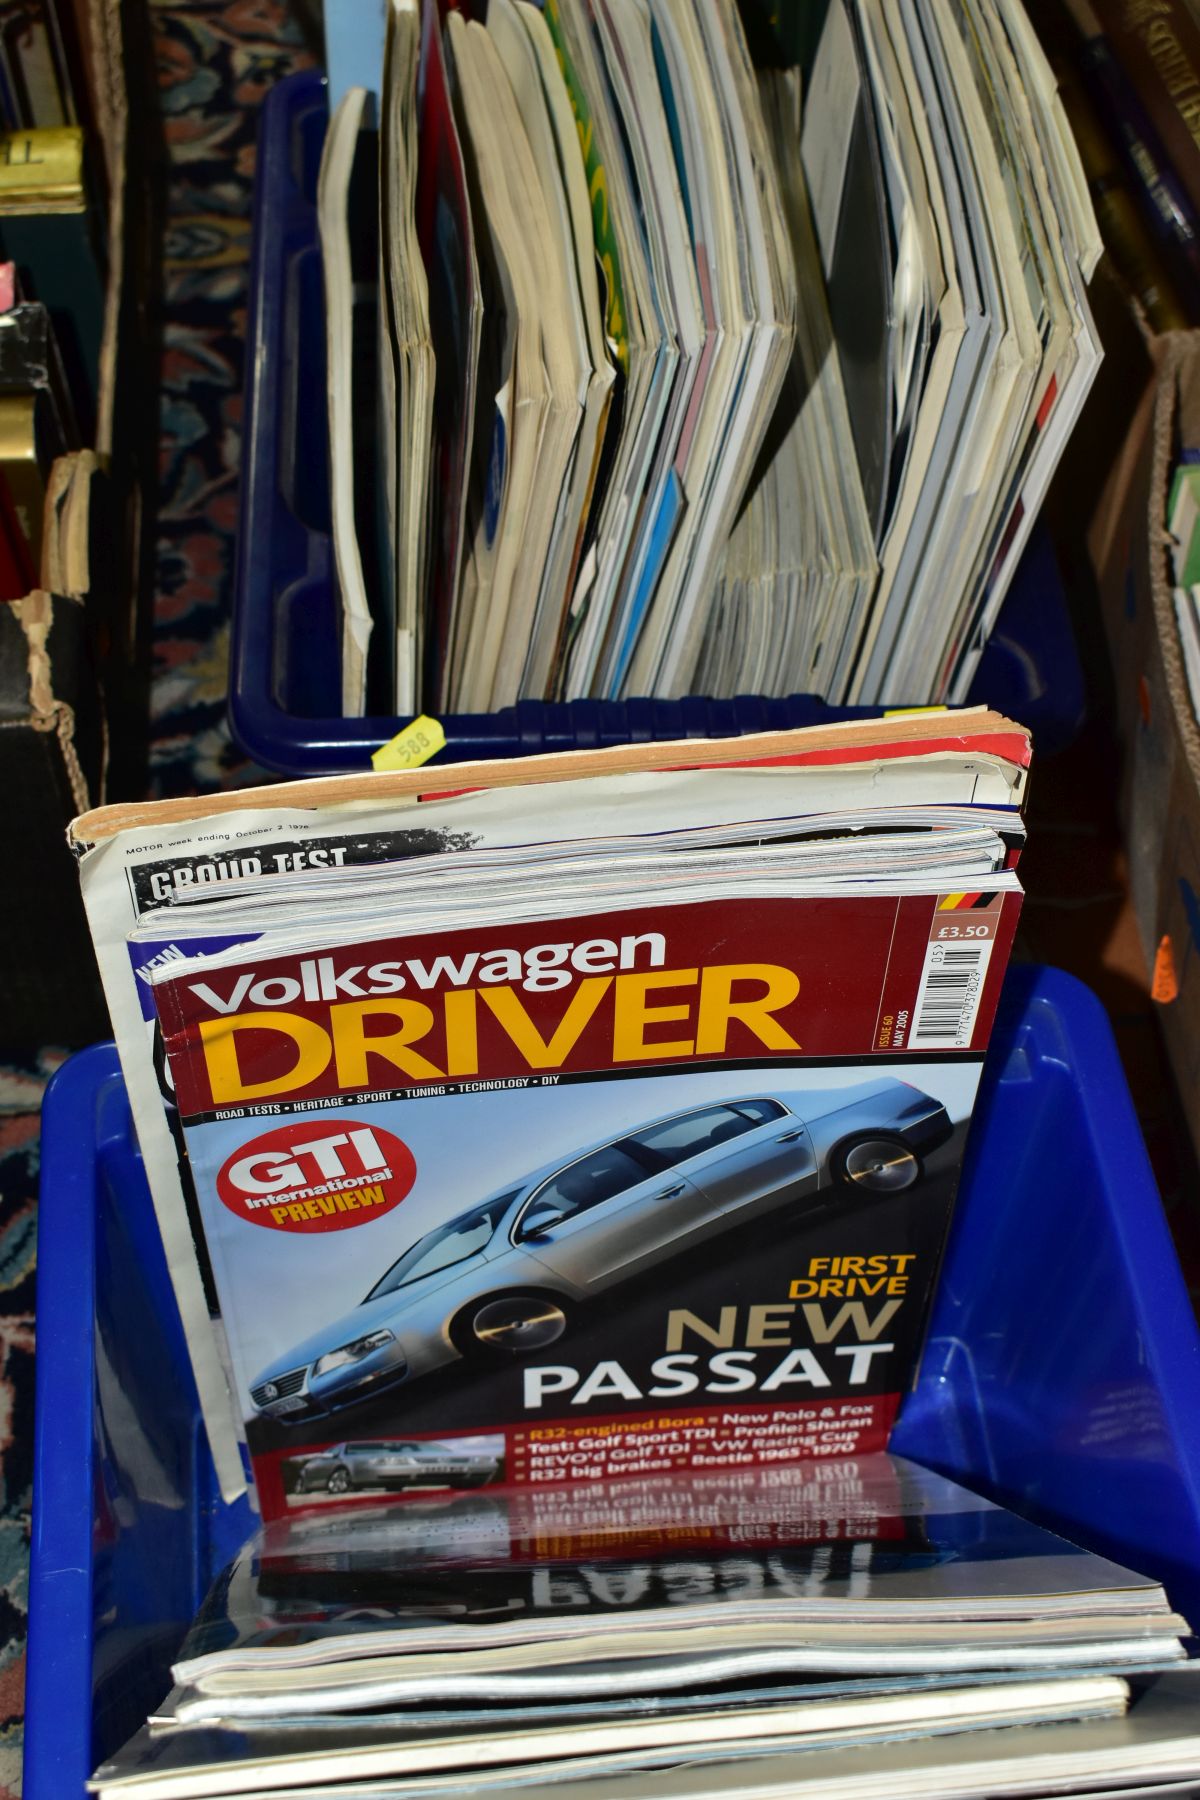 MOTORING BROCHURES & MAGAZINES, two boxes containing brochures on the manufacturers Jeep, Ford, - Image 4 of 5